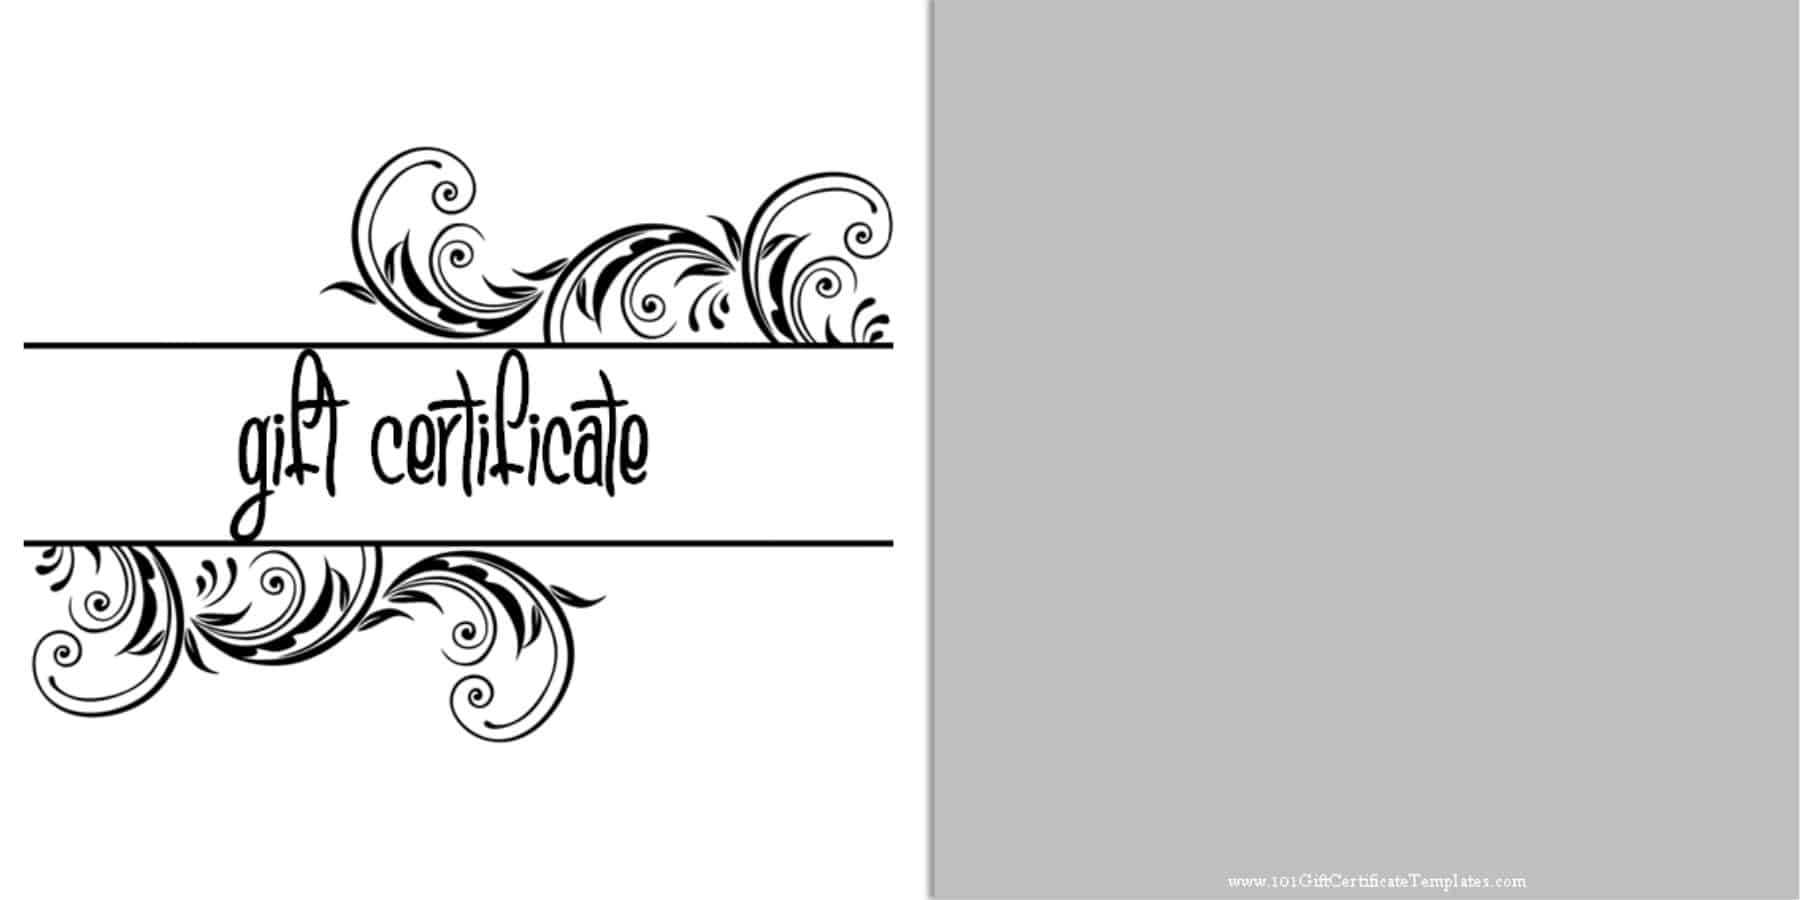 Printable Gift Certificate Templates In Black And White Gift Certificate Template Free